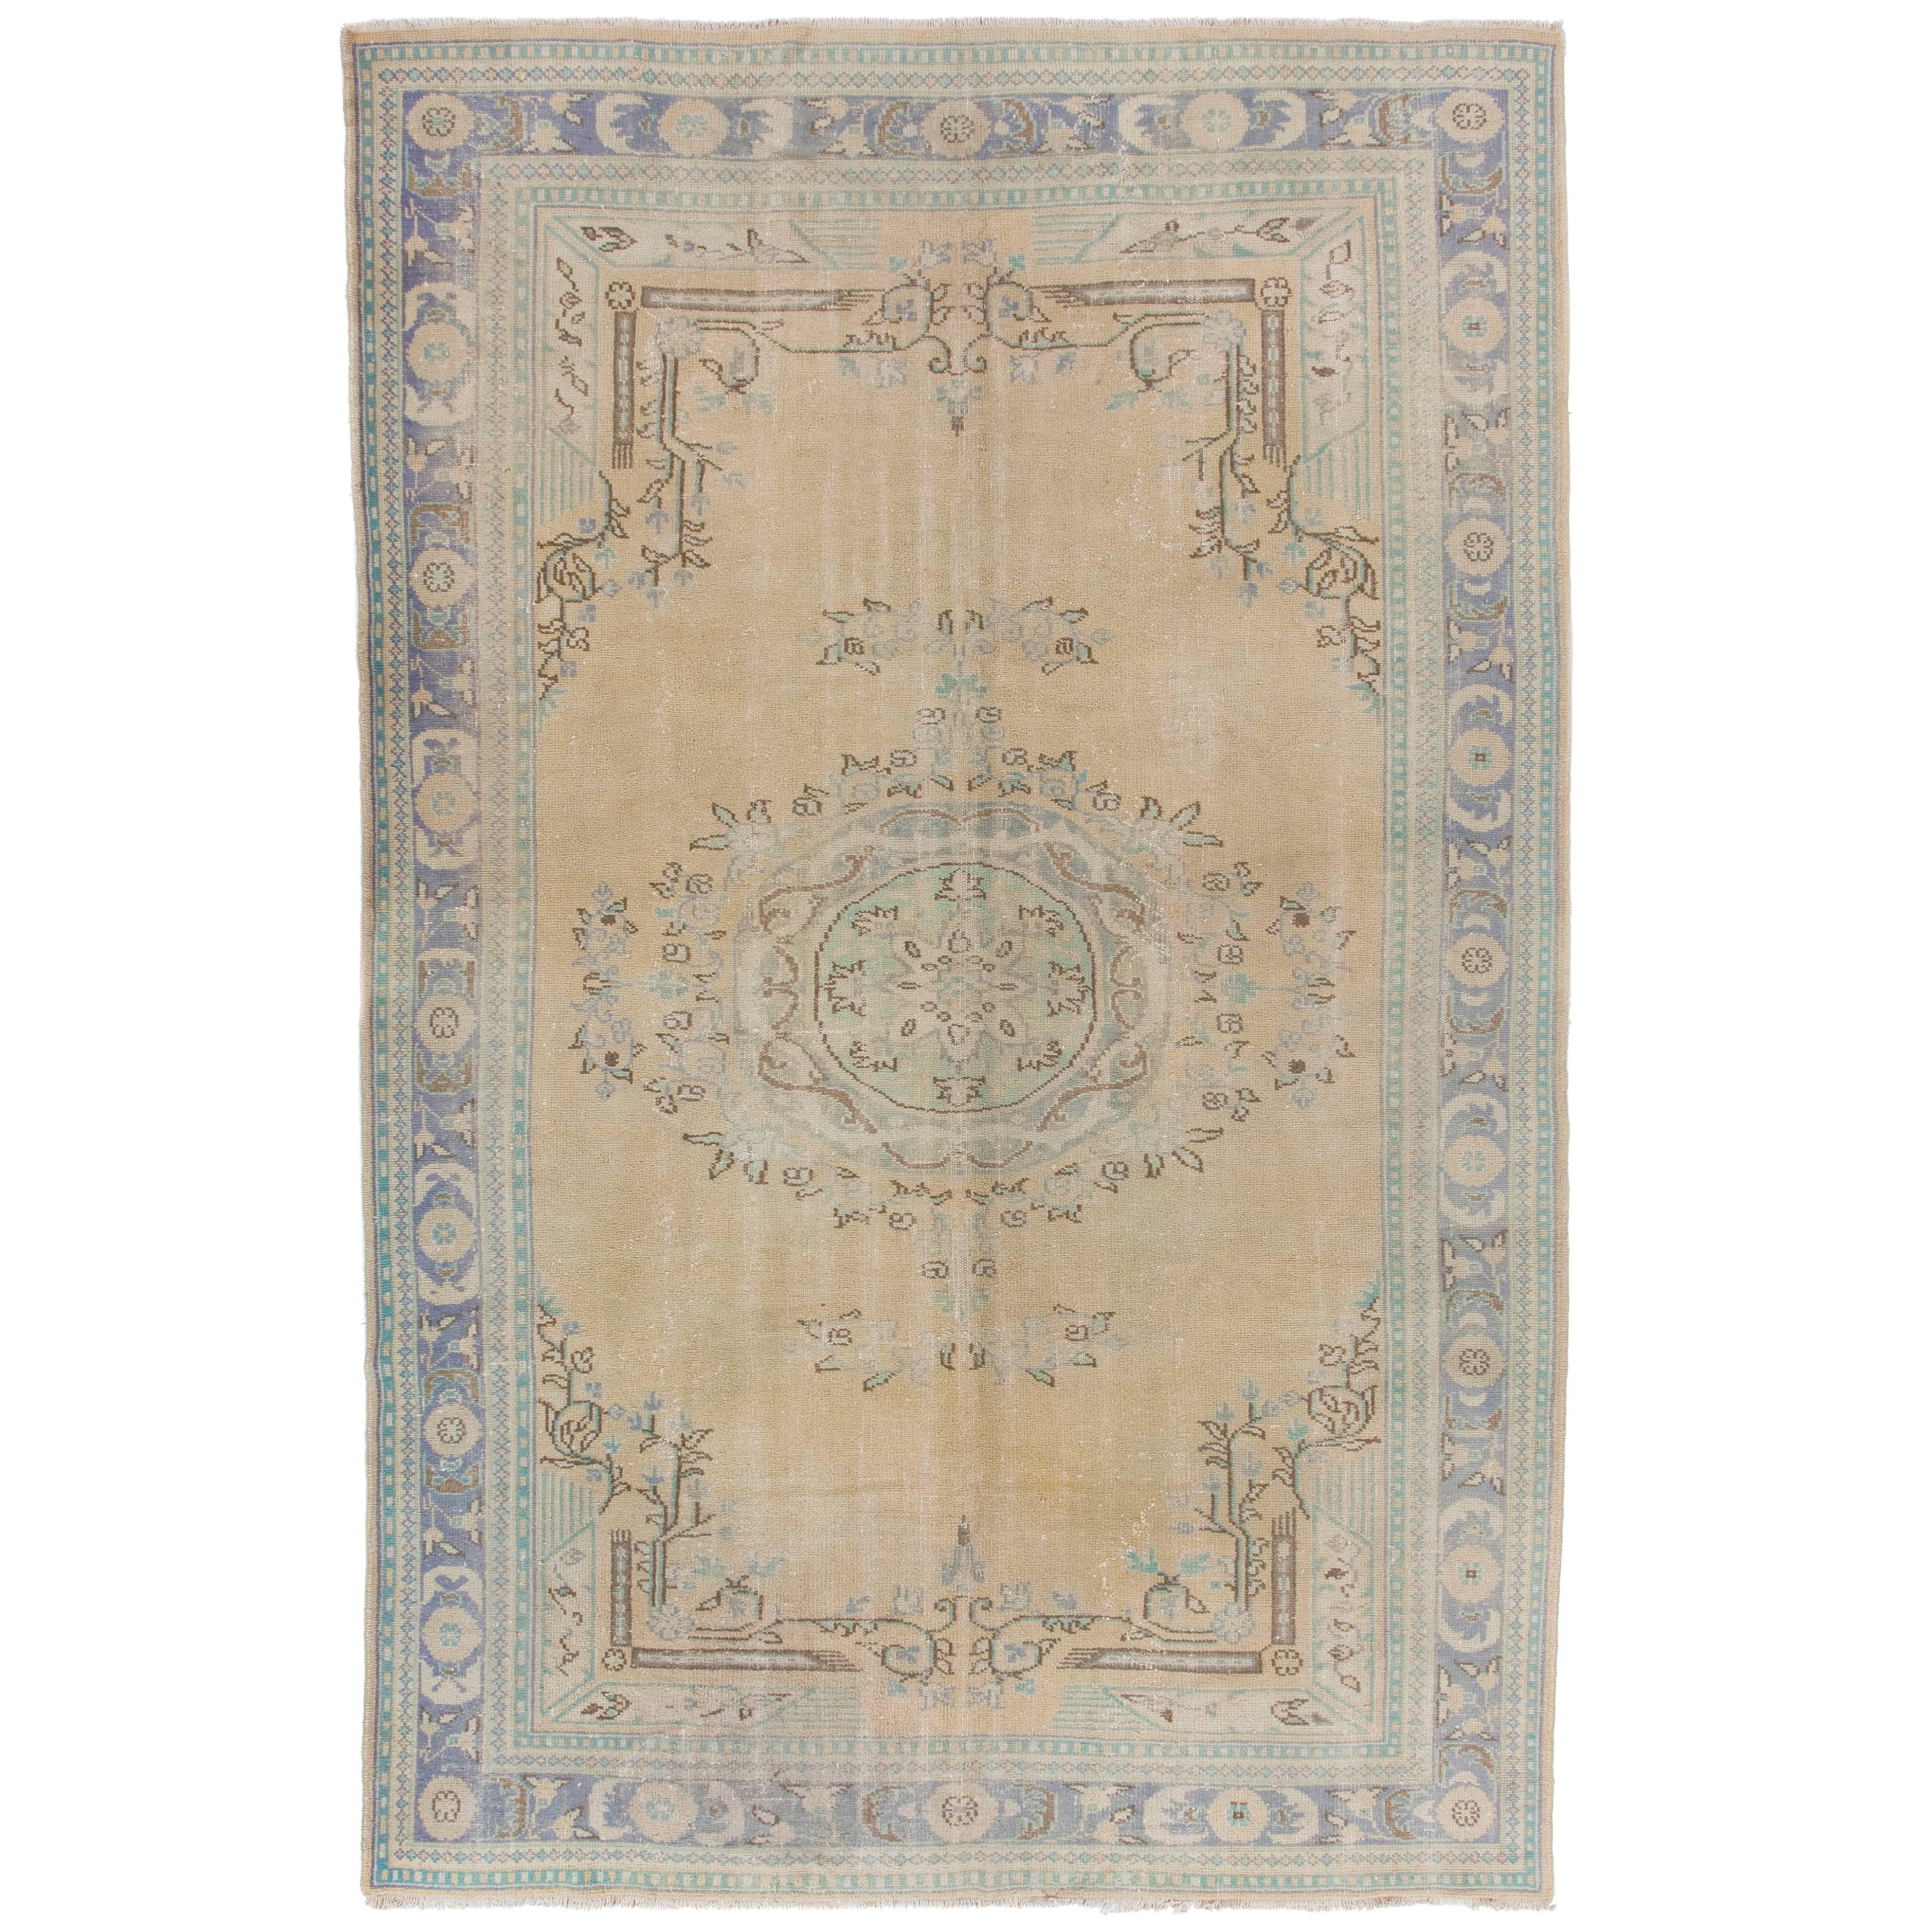 Vintage Turkish Oushak Rug in Muted Colors